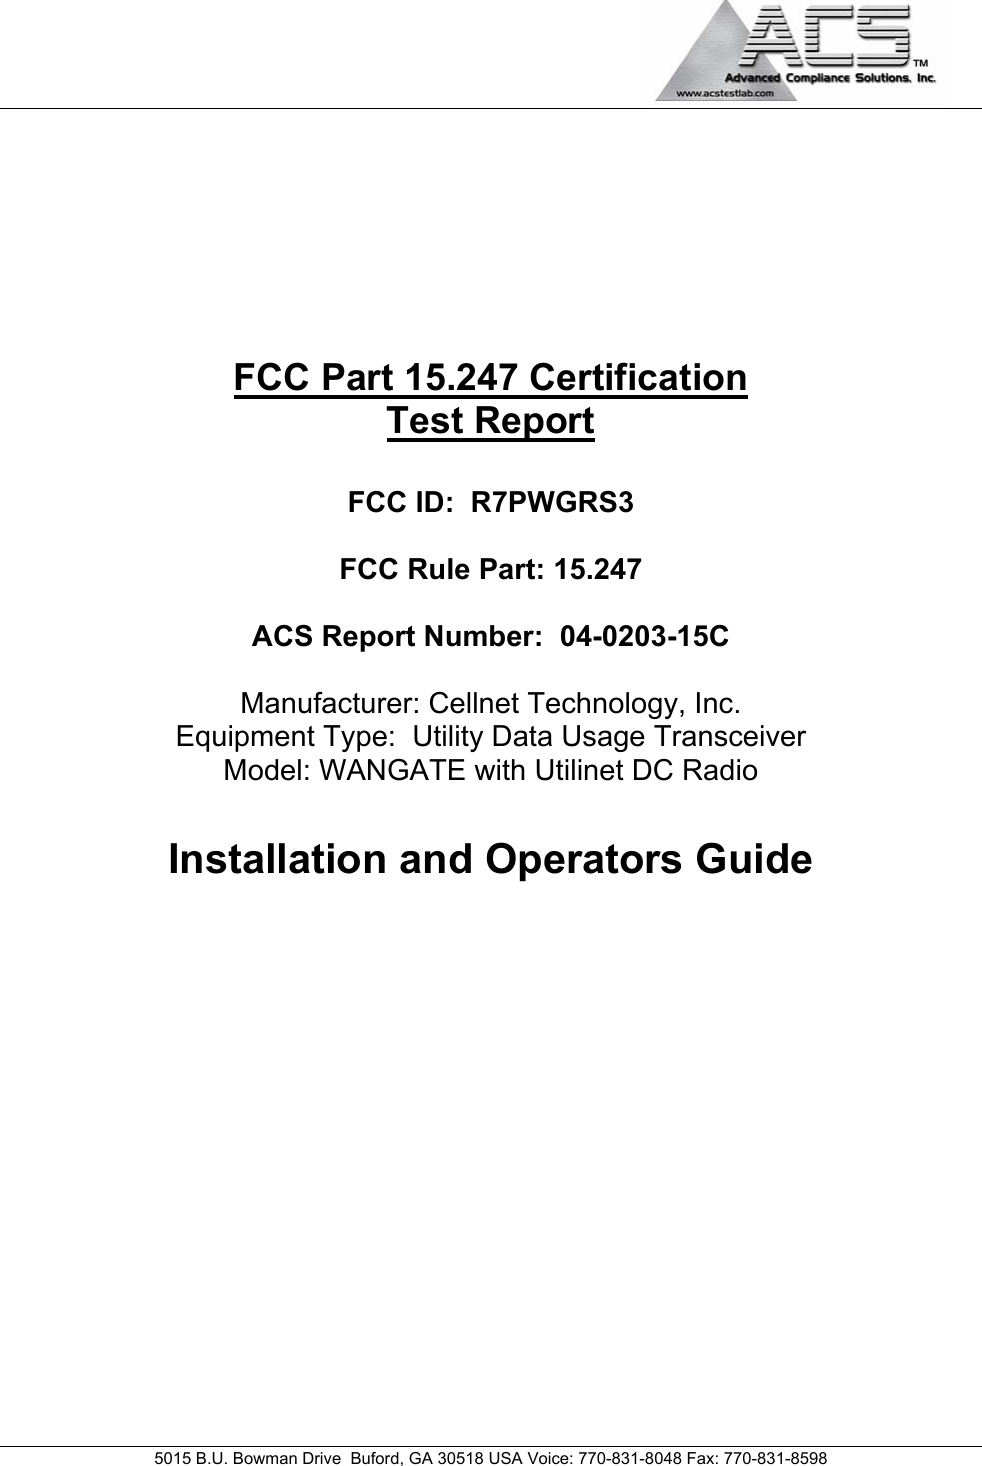                                             5015 B.U. Bowman Drive  Buford, GA 30518 USA Voice: 770-831-8048 Fax: 770-831-8598        FCC Part 15.247 Certification Test Report  FCC ID:  R7PWGRS3  FCC Rule Part: 15.247  ACS Report Number:  04-0203-15C   Manufacturer: Cellnet Technology, Inc.  Equipment Type:  Utility Data Usage Transceiver  Model: WANGATE with Utilinet DC Radio  Installation and Operators Guide            